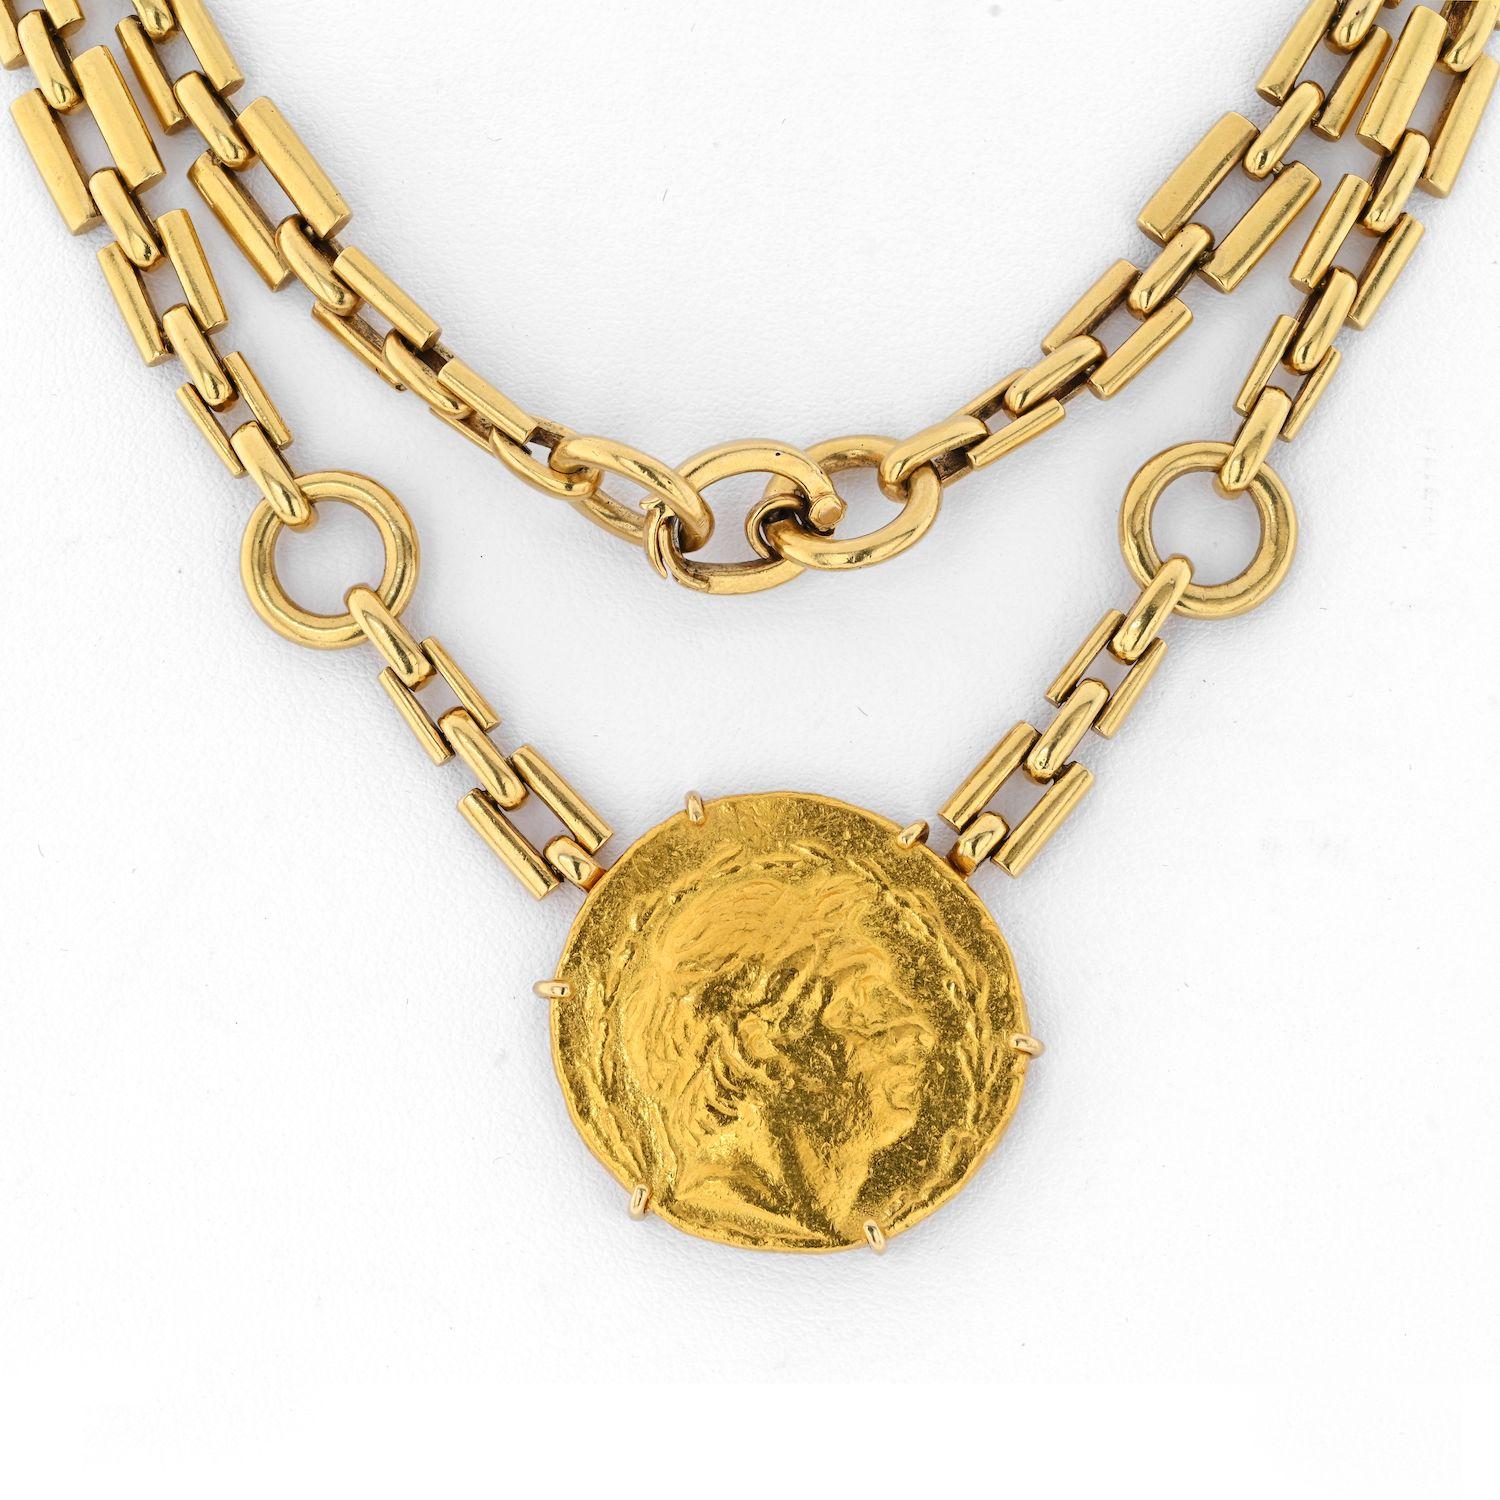 Made with ancient greek gold coins, large in the center and four small ones in the chain this statement David Webb jewel is sure to become your favorite the moment you put it on. 
Made in 18K Yellow Gold the chain necklace measures 31 inches long